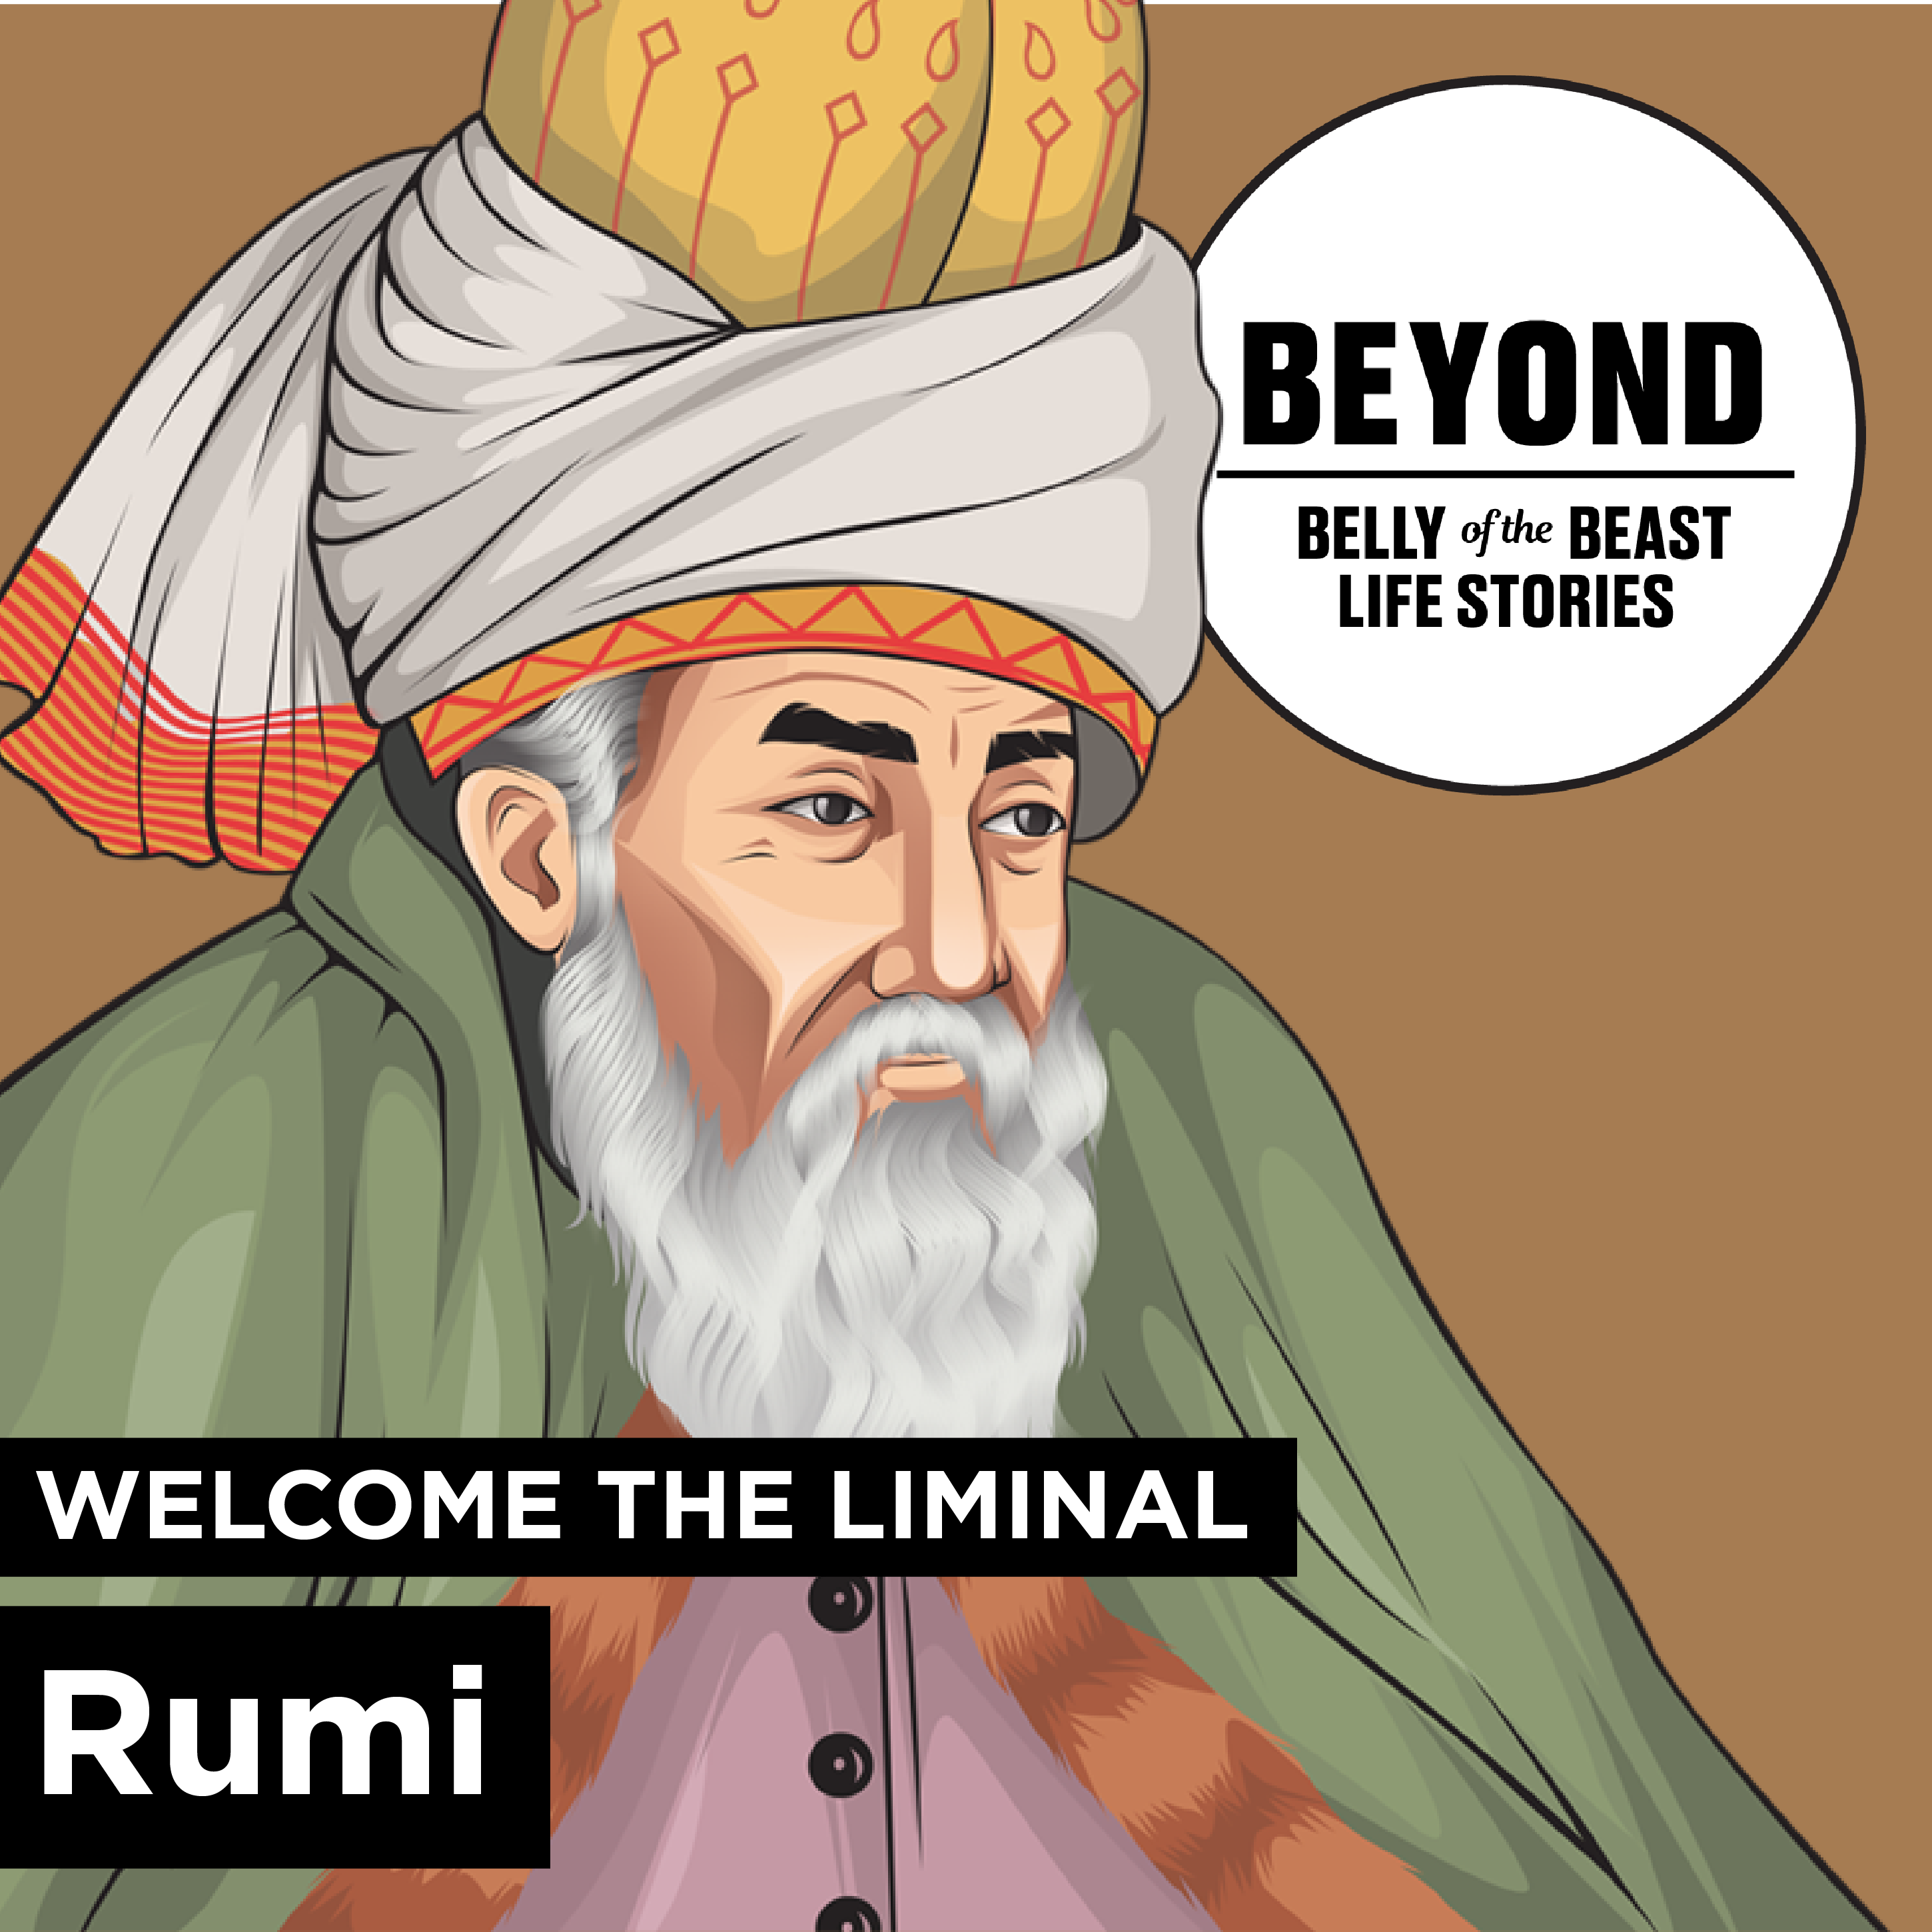 Beyond: Welcome the Liminal and Rumi